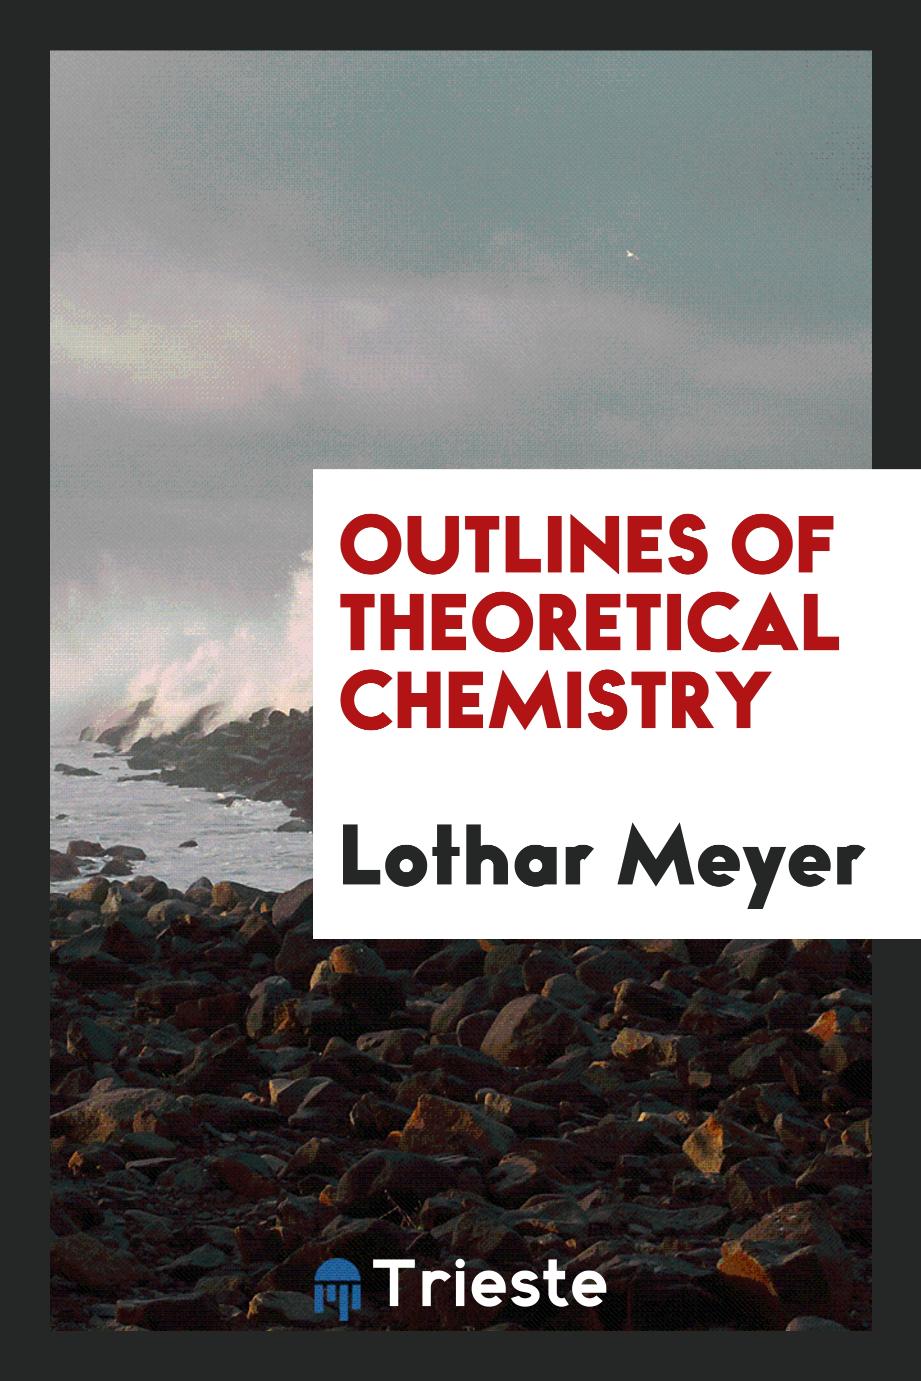 Outlines of theoretical chemistry